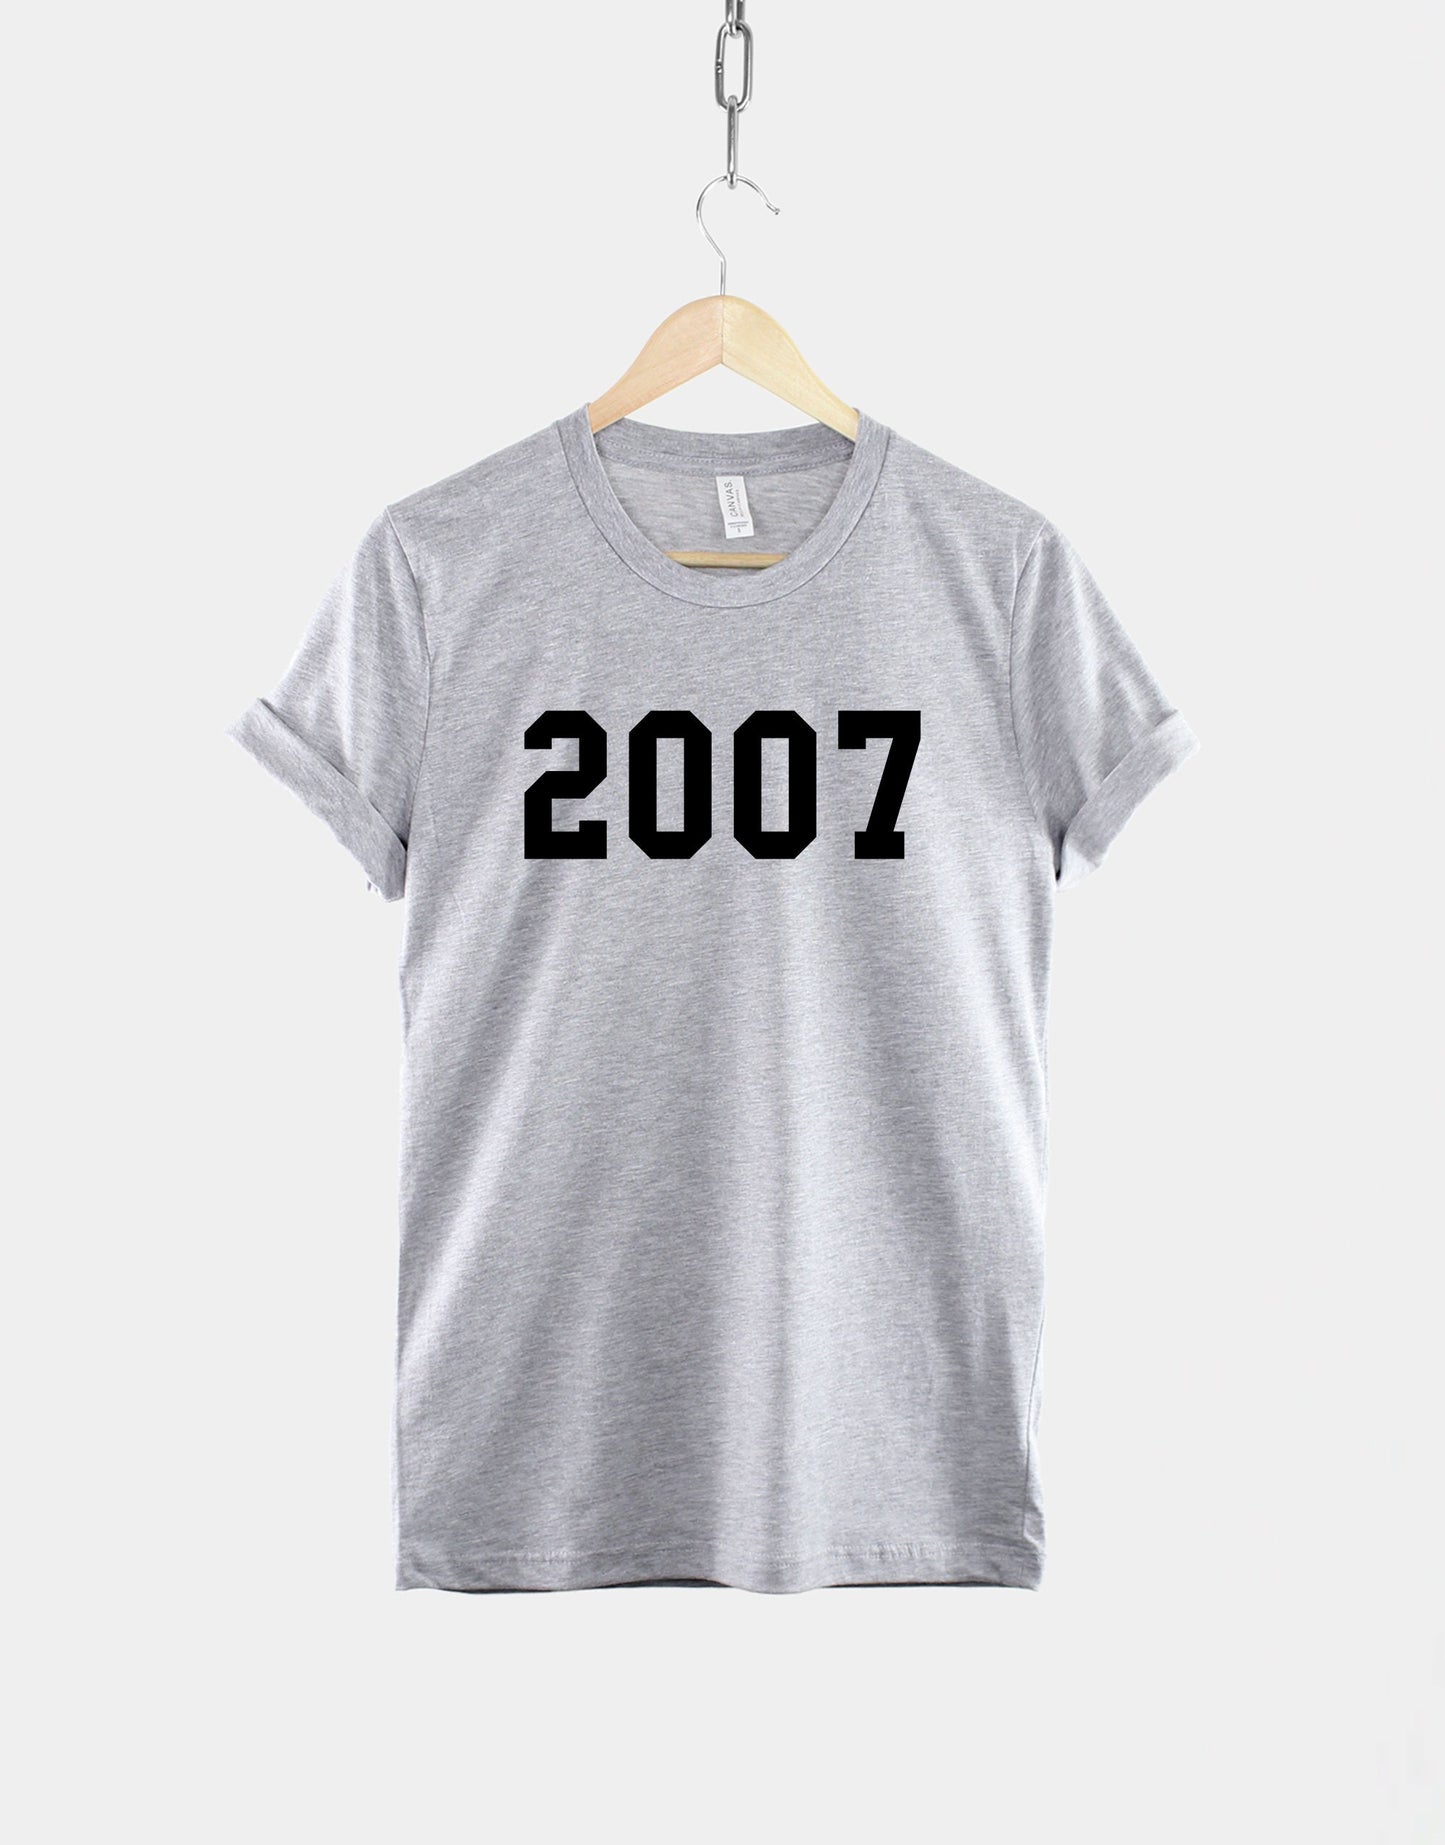 2007 16th Birthday Shirt - Made In Year Numbers T-Shirt